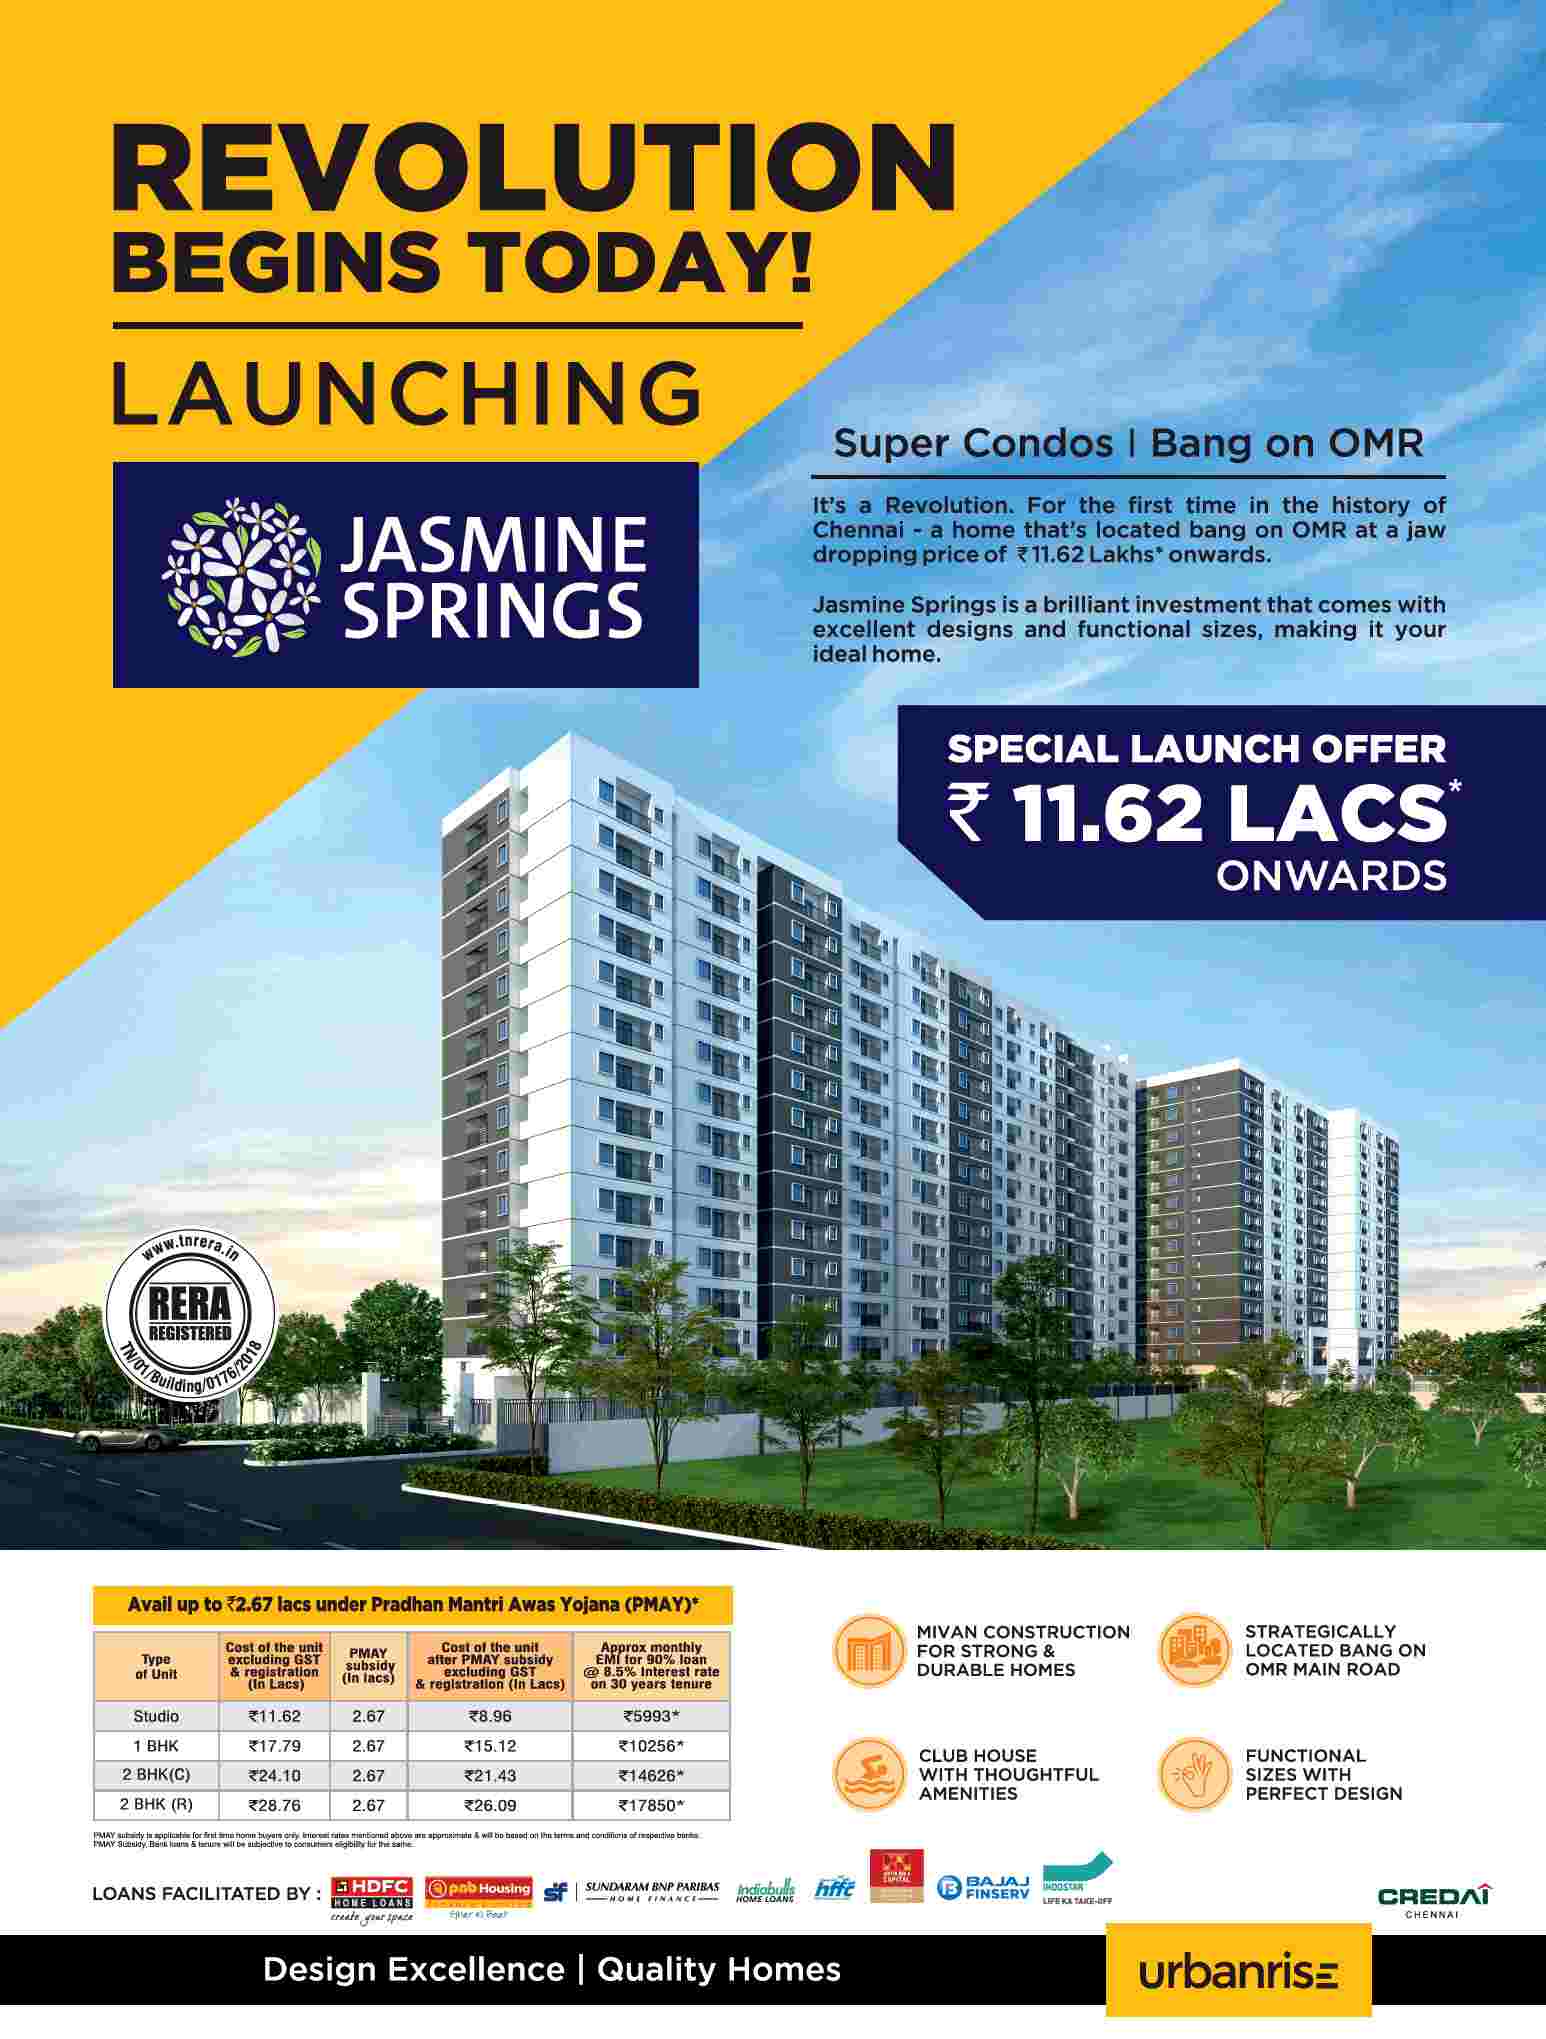 Book your home with special launch offer of Rs. 11.62 Lacs onwards at Alliance Jasmine Springs in Chennai